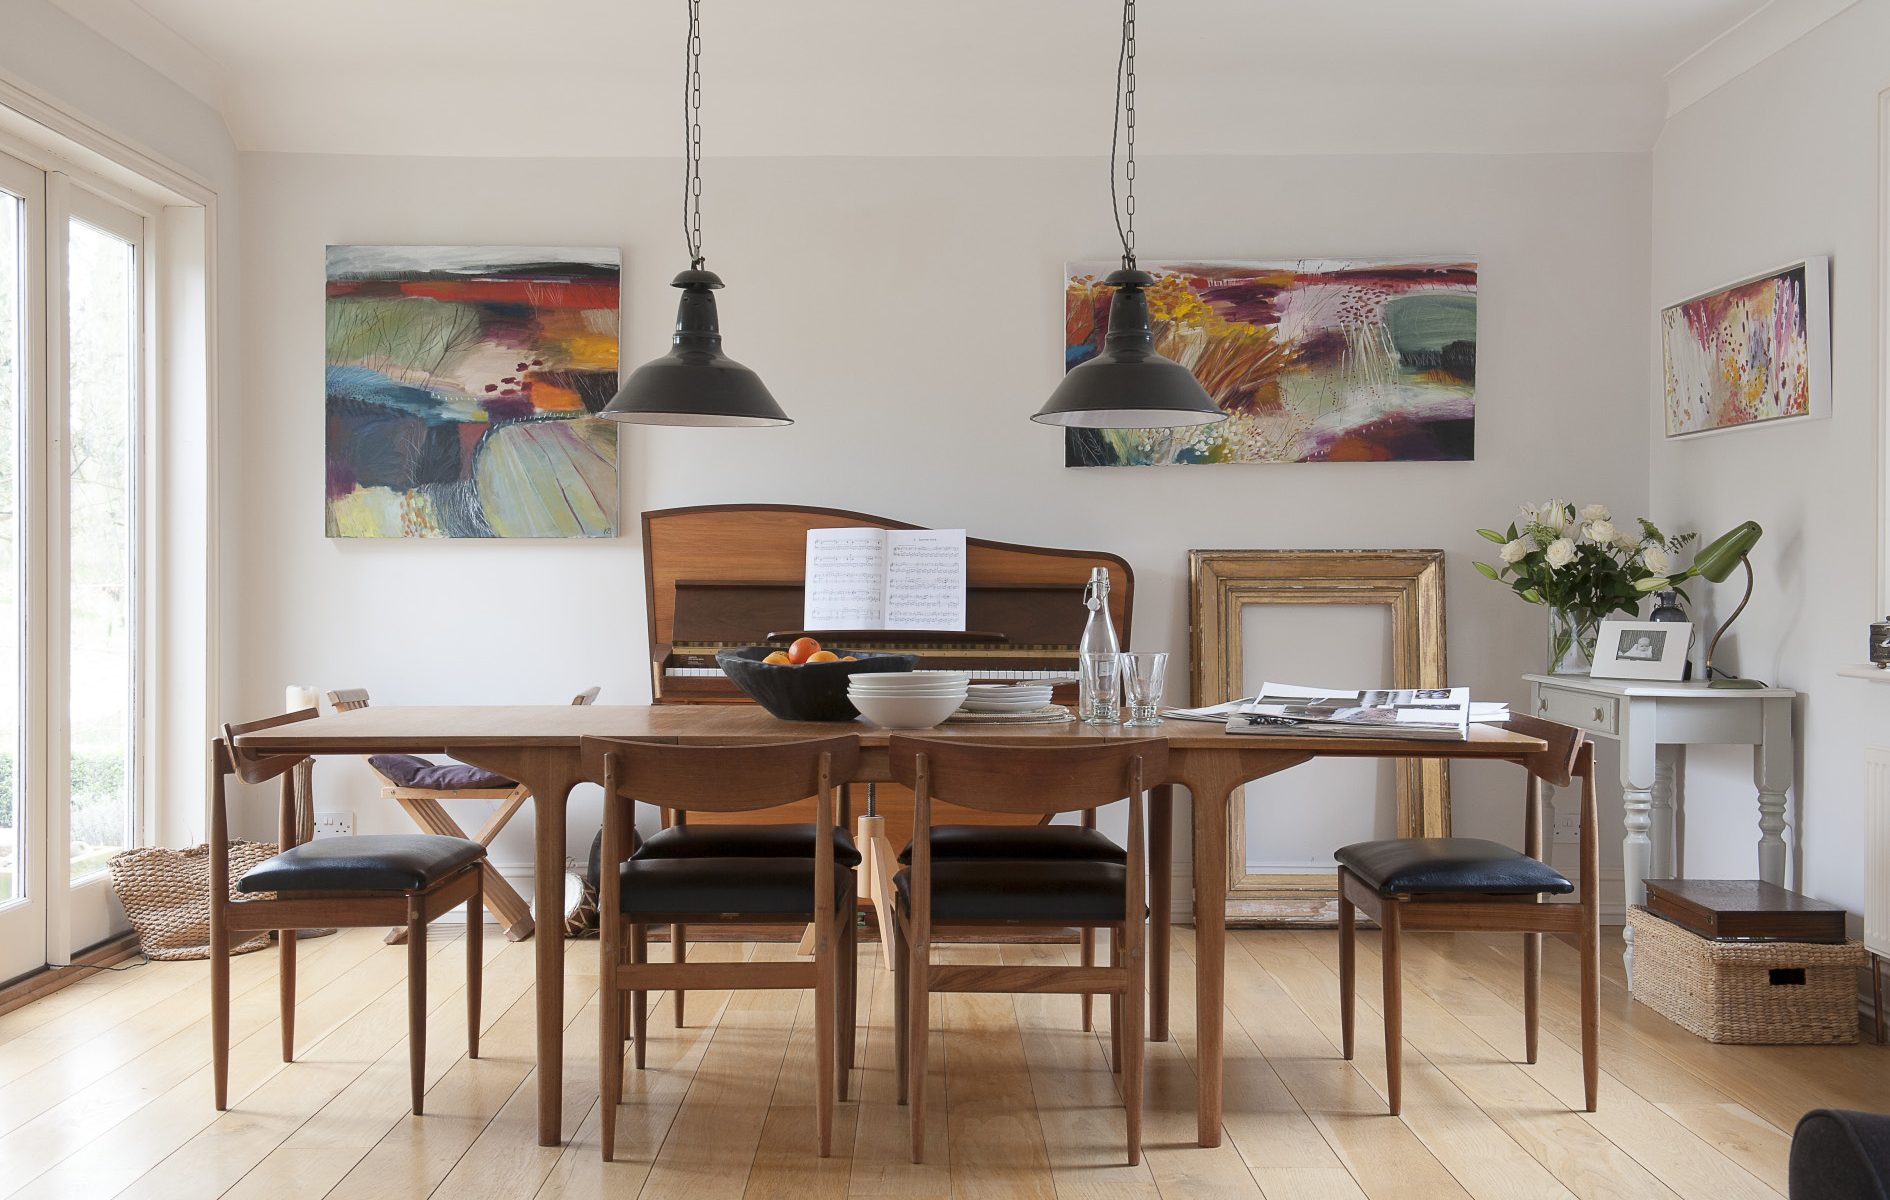 In the dining room, pride of place goes to the 1960s in the shape of a slim and elegant dining table over which hang a pair of old industrial lights from an antique shop in Hastings. Behind it is a wonderful ’60s Dutch Rippen upright piano